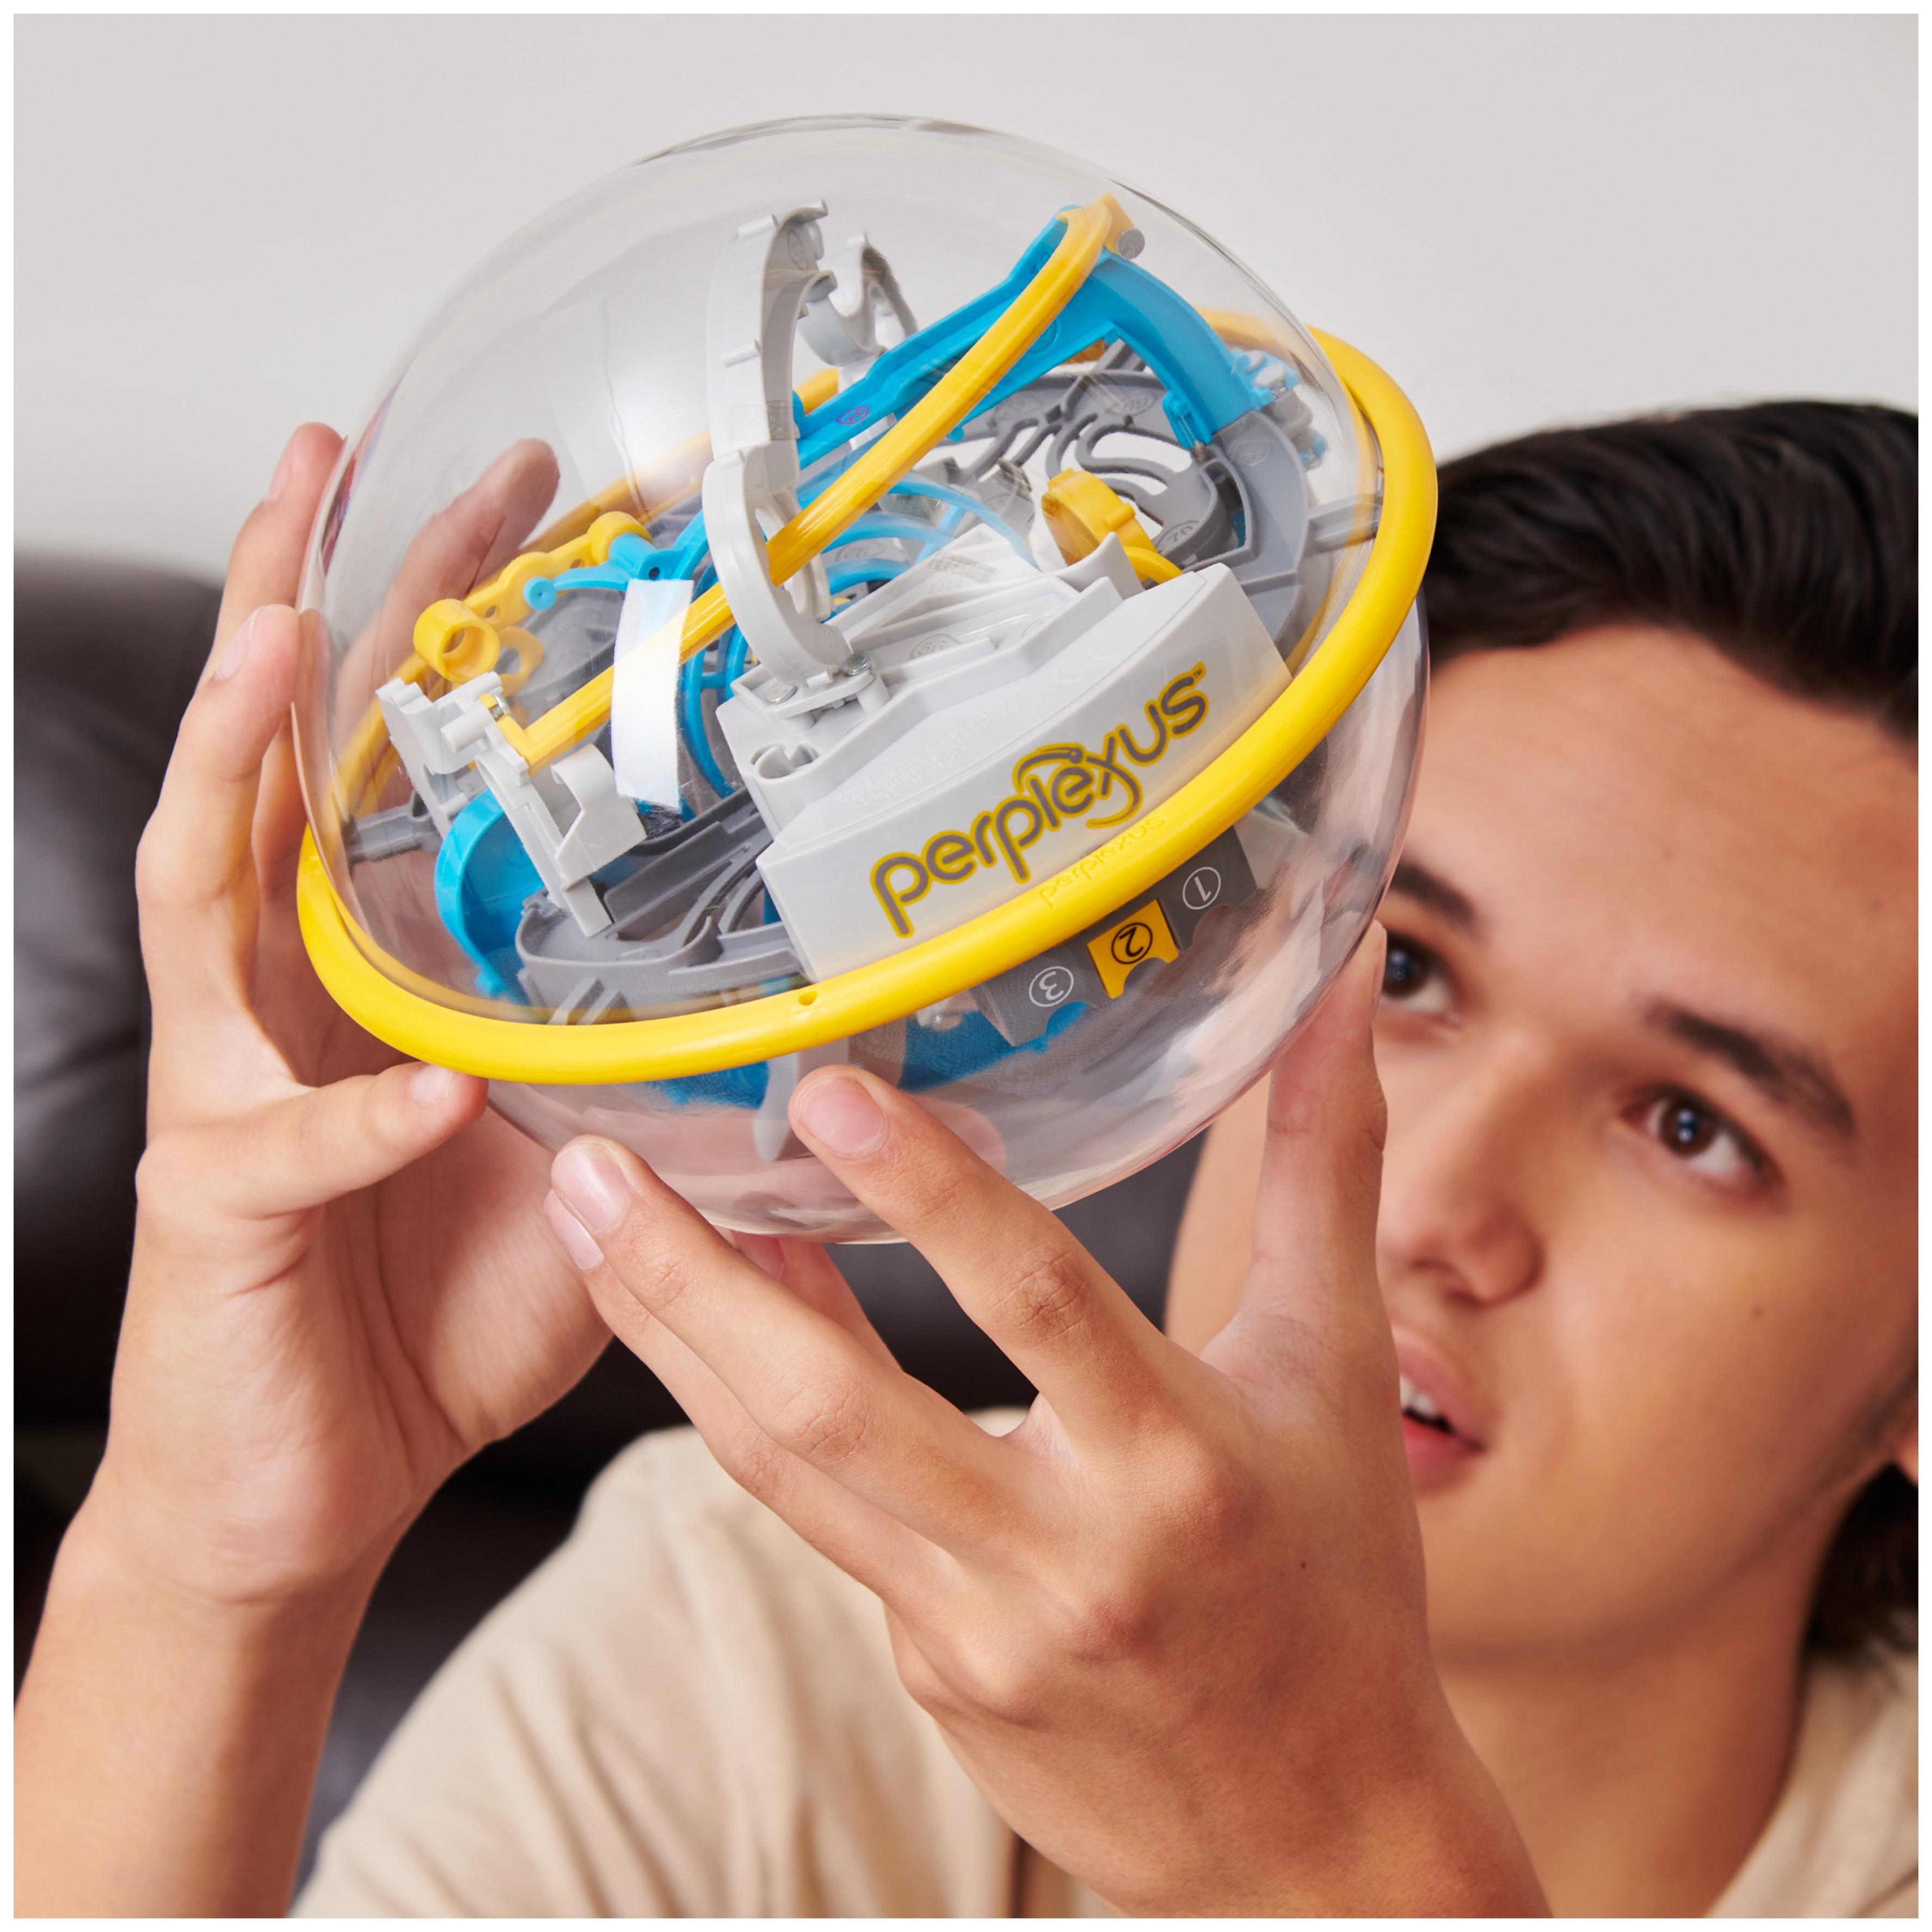  Spin Master Games Perplexus Rebel, 3D Maze Game Sensory Fidget  Toy Brain Teaser Gravity Maze Puzzle Ball with 70 Obstacles and Rubik's  Perplexus Fusion 3 x 3 Challenging Puzzle Maze Ball 